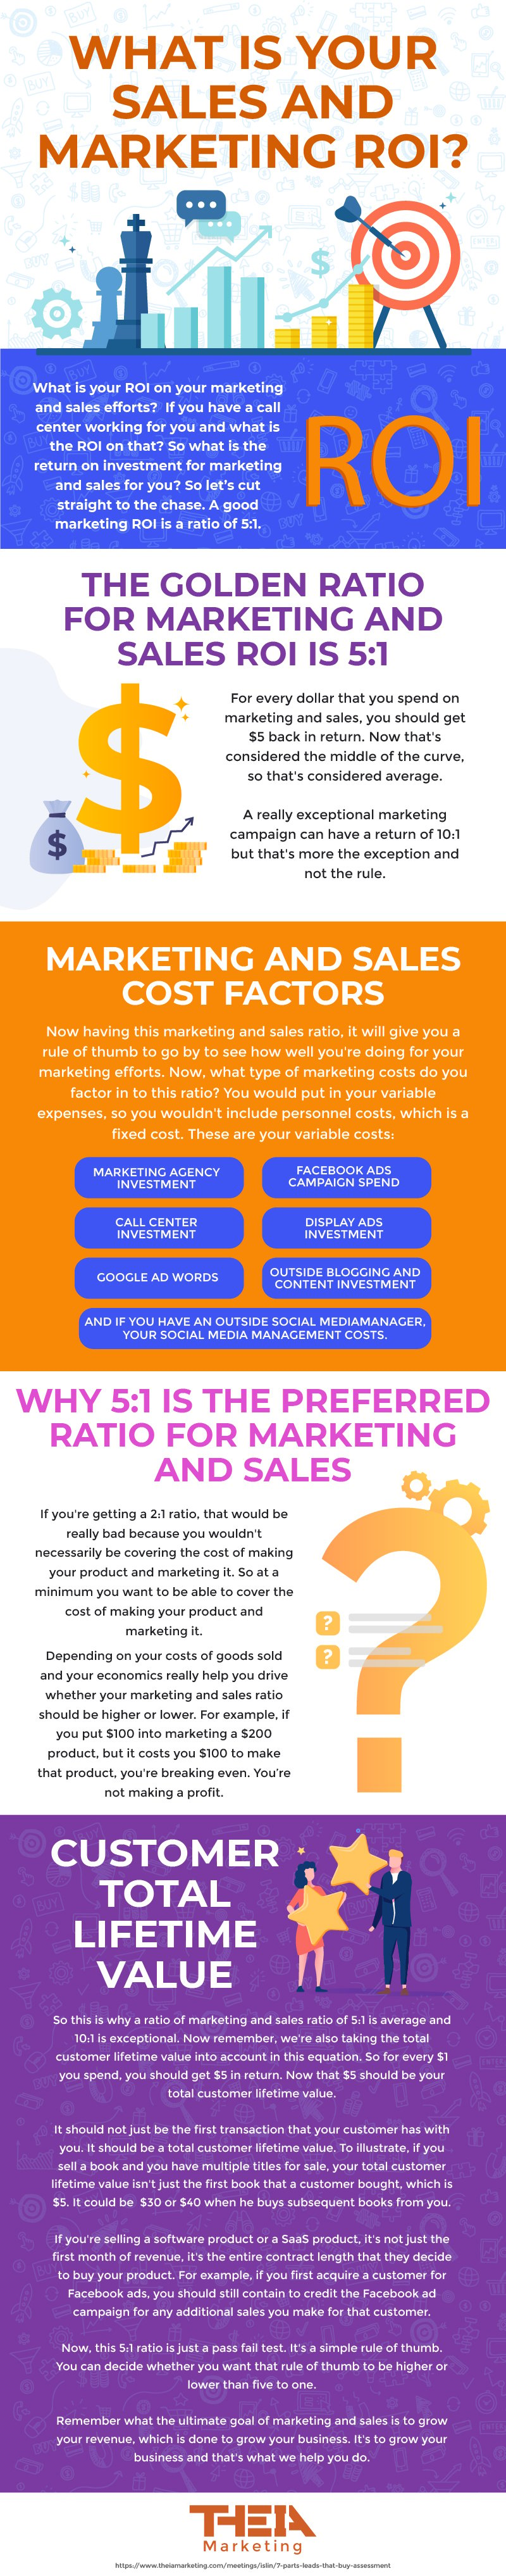 555936_ROI on Sales and Marketing Infographic_101019